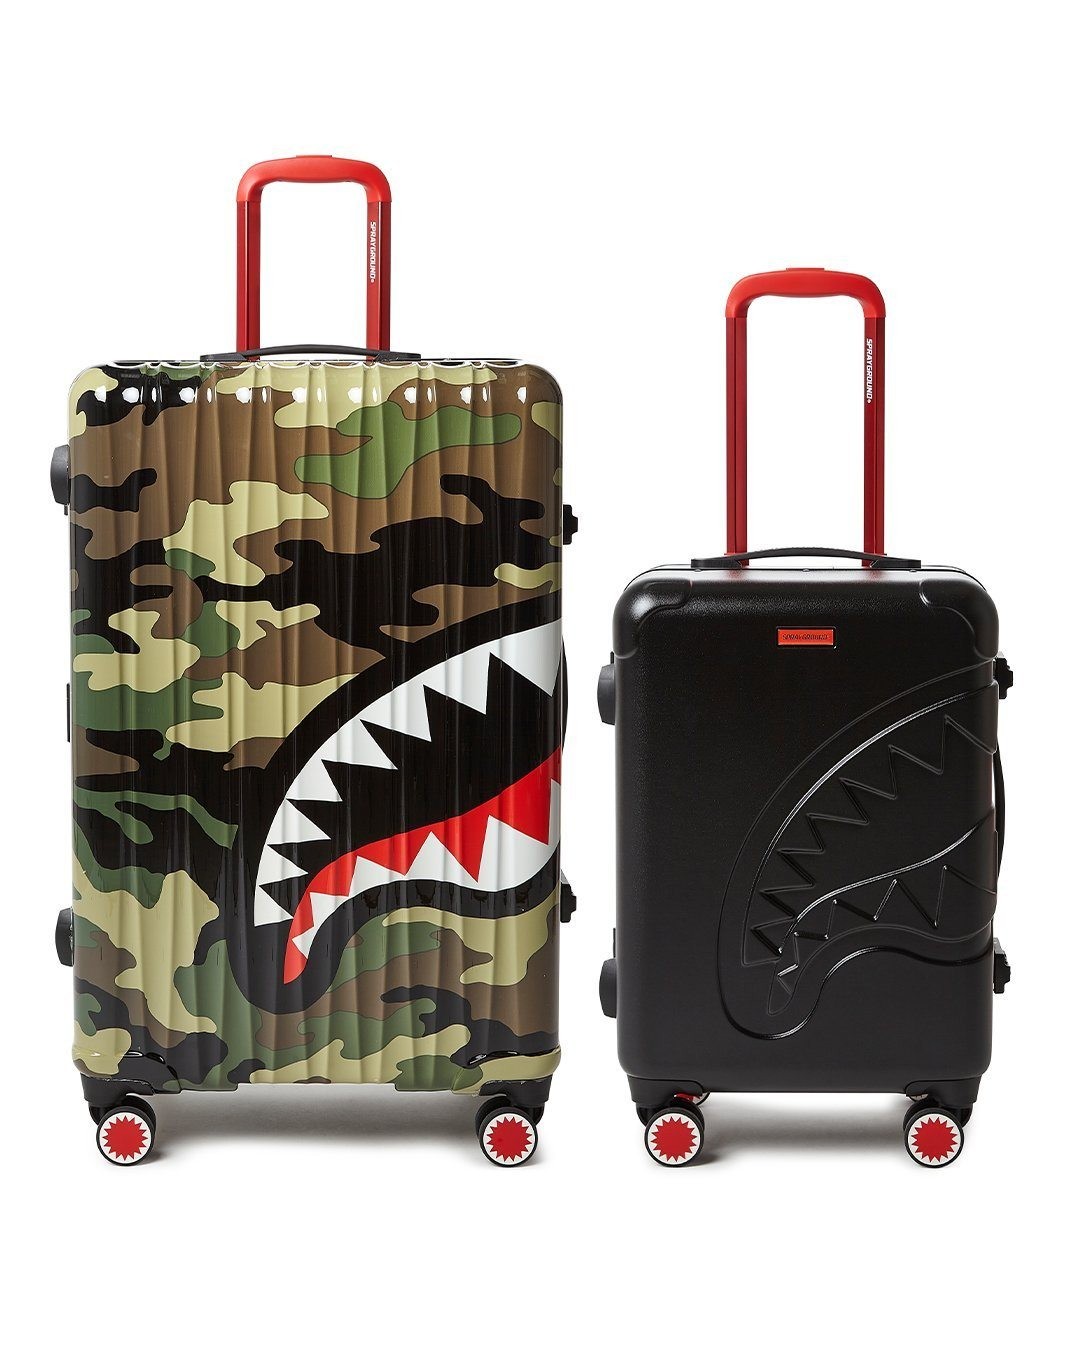 Discount | Full-Size Camo Carry-On Black Luggage Bundle Sprayground Sale - Discount | Full-Size Camo Carry-On Black Luggage Bundle Sprayground Sale-31